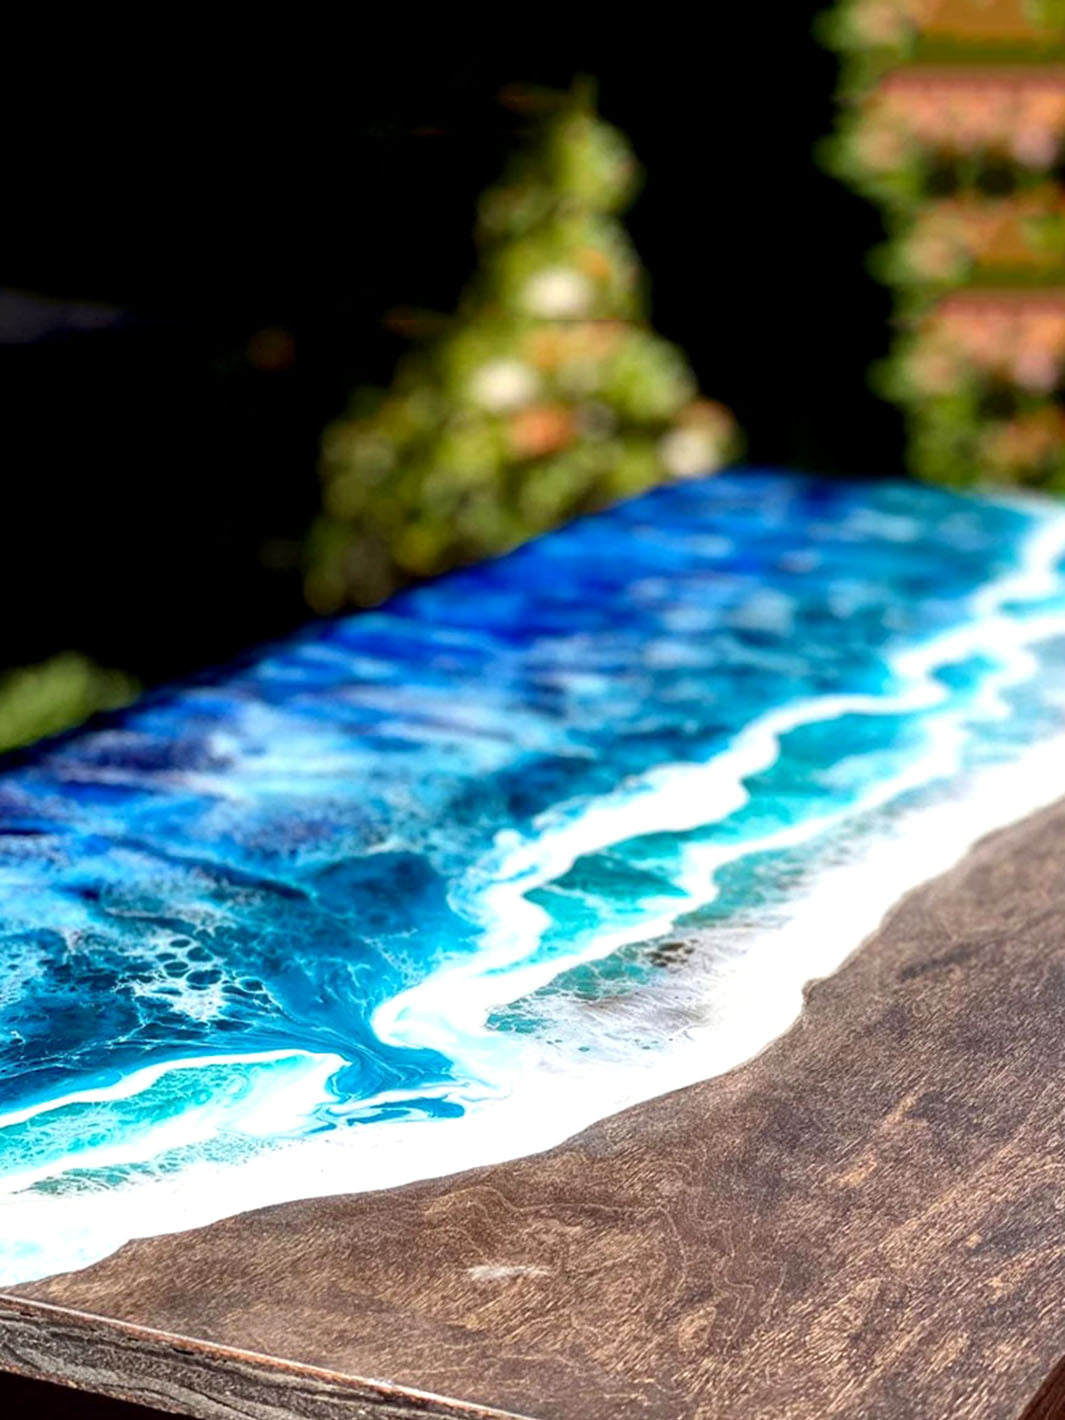 Handcrafted Beach Inspired Elongated Epoxy Resin Dining Table 84" L x 42" W Artsheedal Tables ART0161-5